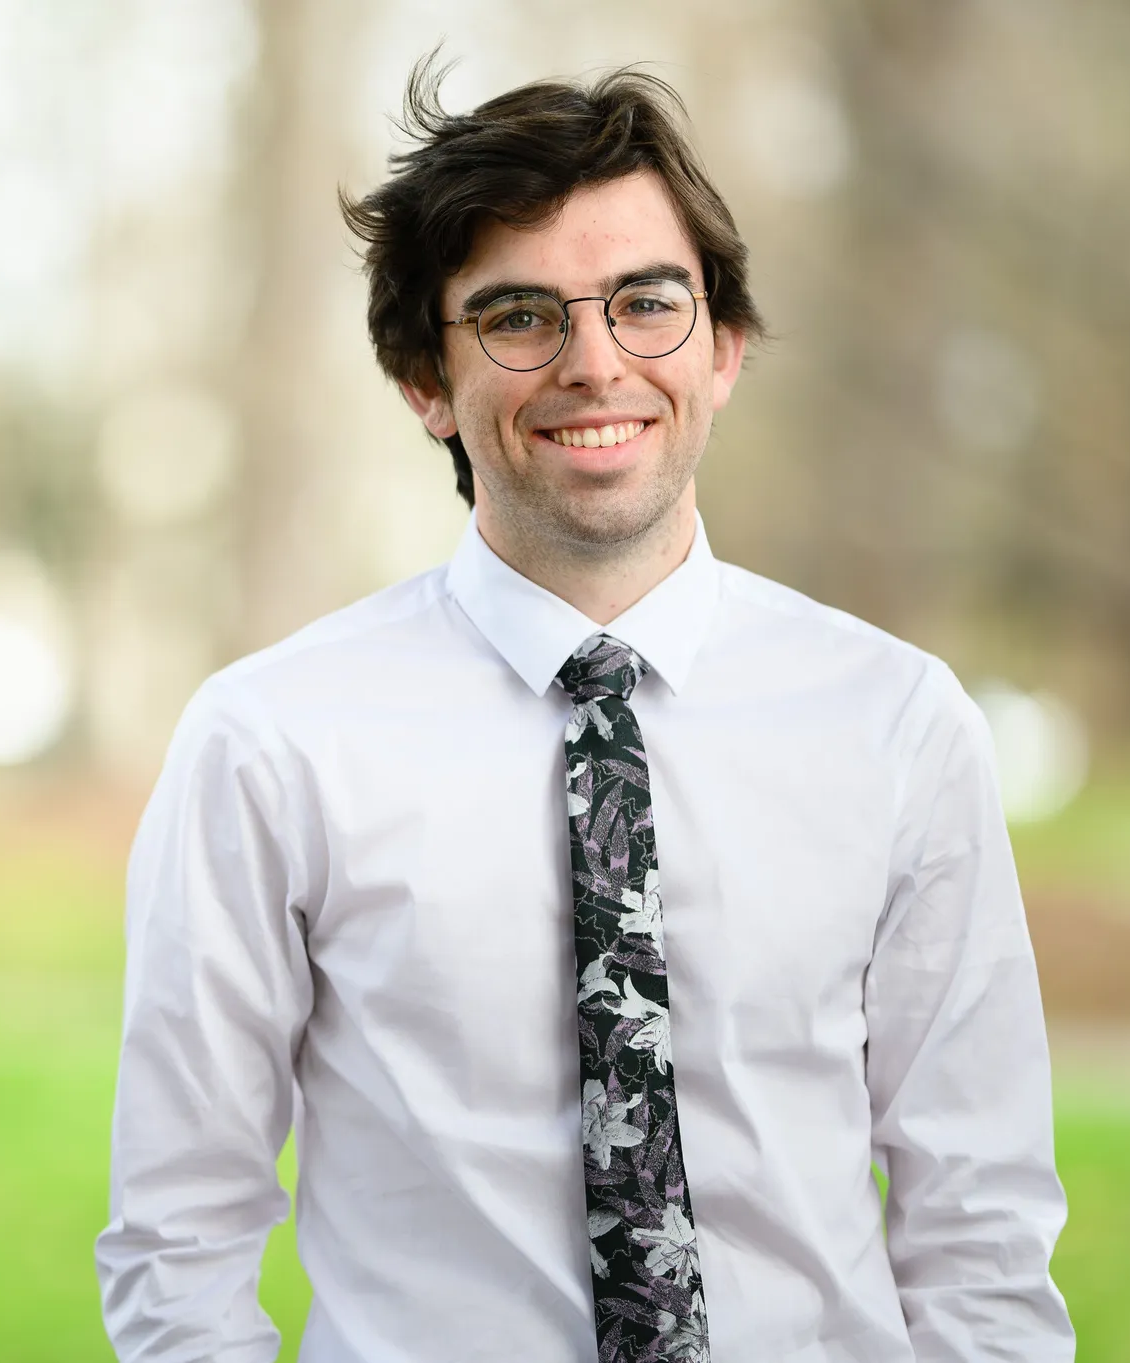 Callum wears glasses, a white shirt and black patterned tie. He is standing in front of blurred green foliage.